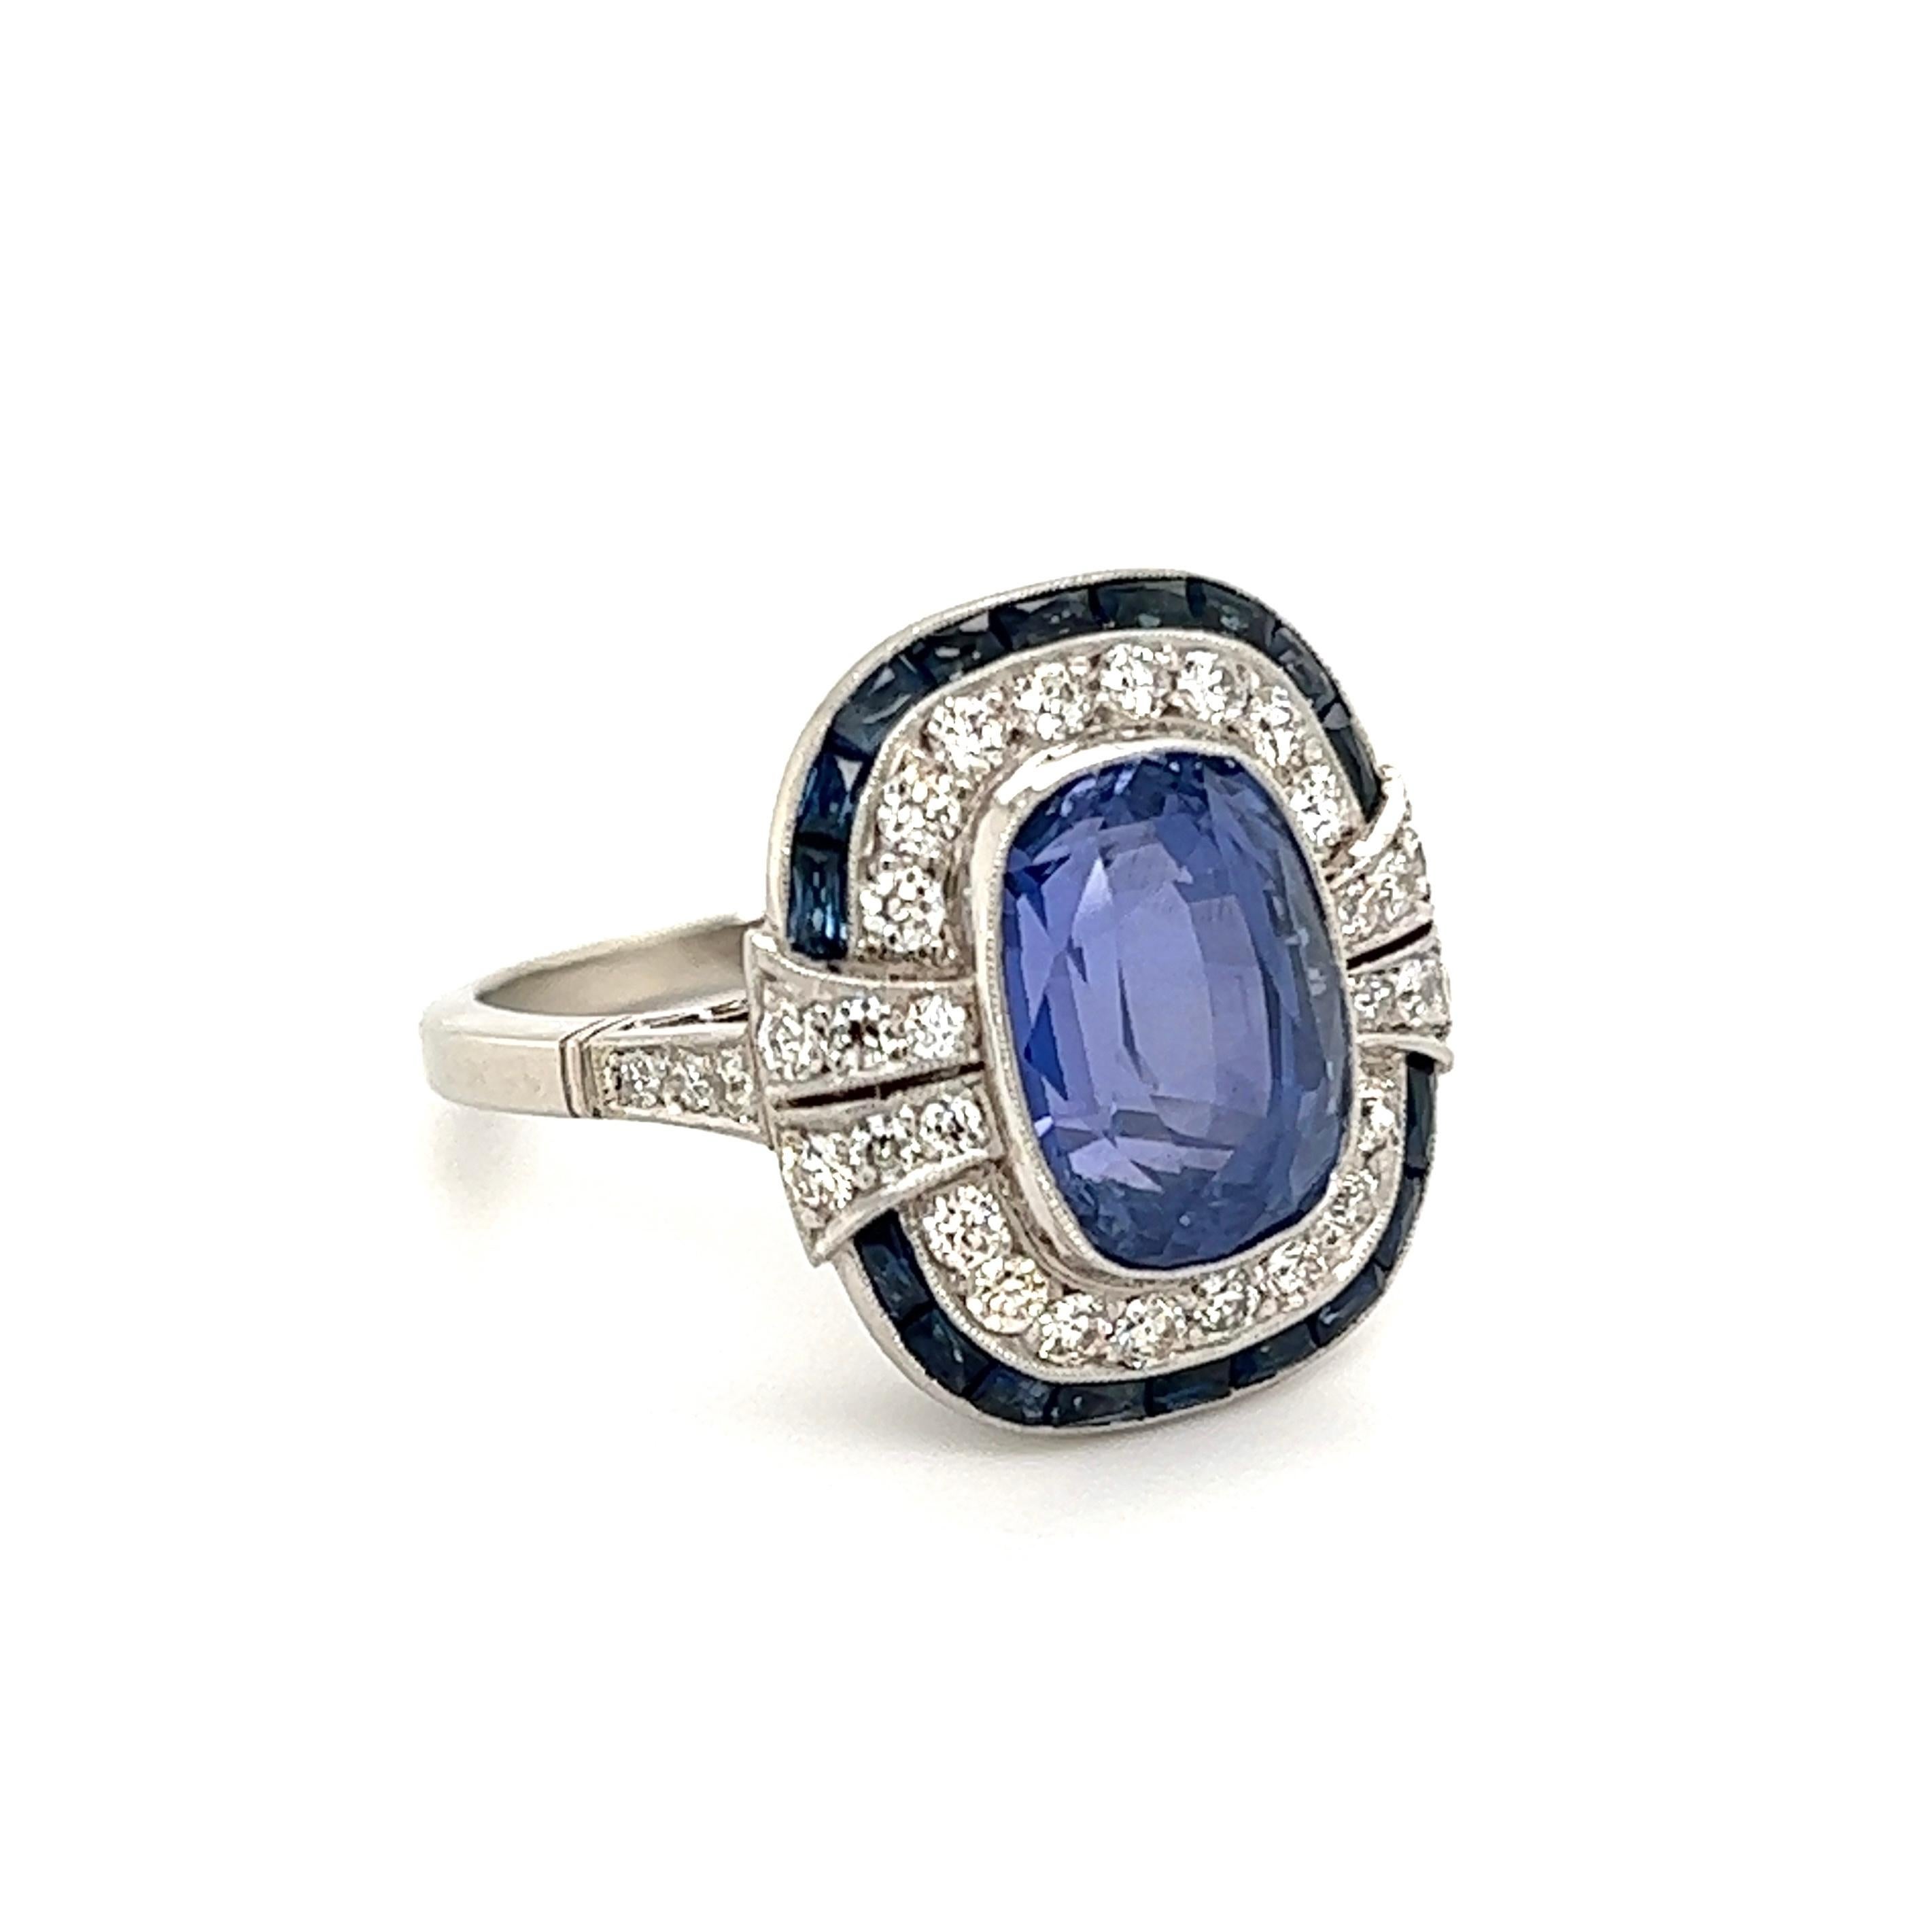 Simply Beautiful! Finely detailed Sapphire and Diamond Art Deco Revival Cocktail Ring. Center Hand set with a securely nestled 6.11 Carat NO HEAT Sapphire GIA#2225297425, surrounded by Diamonds, approx. 0.67tcw and Sapphires, approx. 0.96tcw. Hand